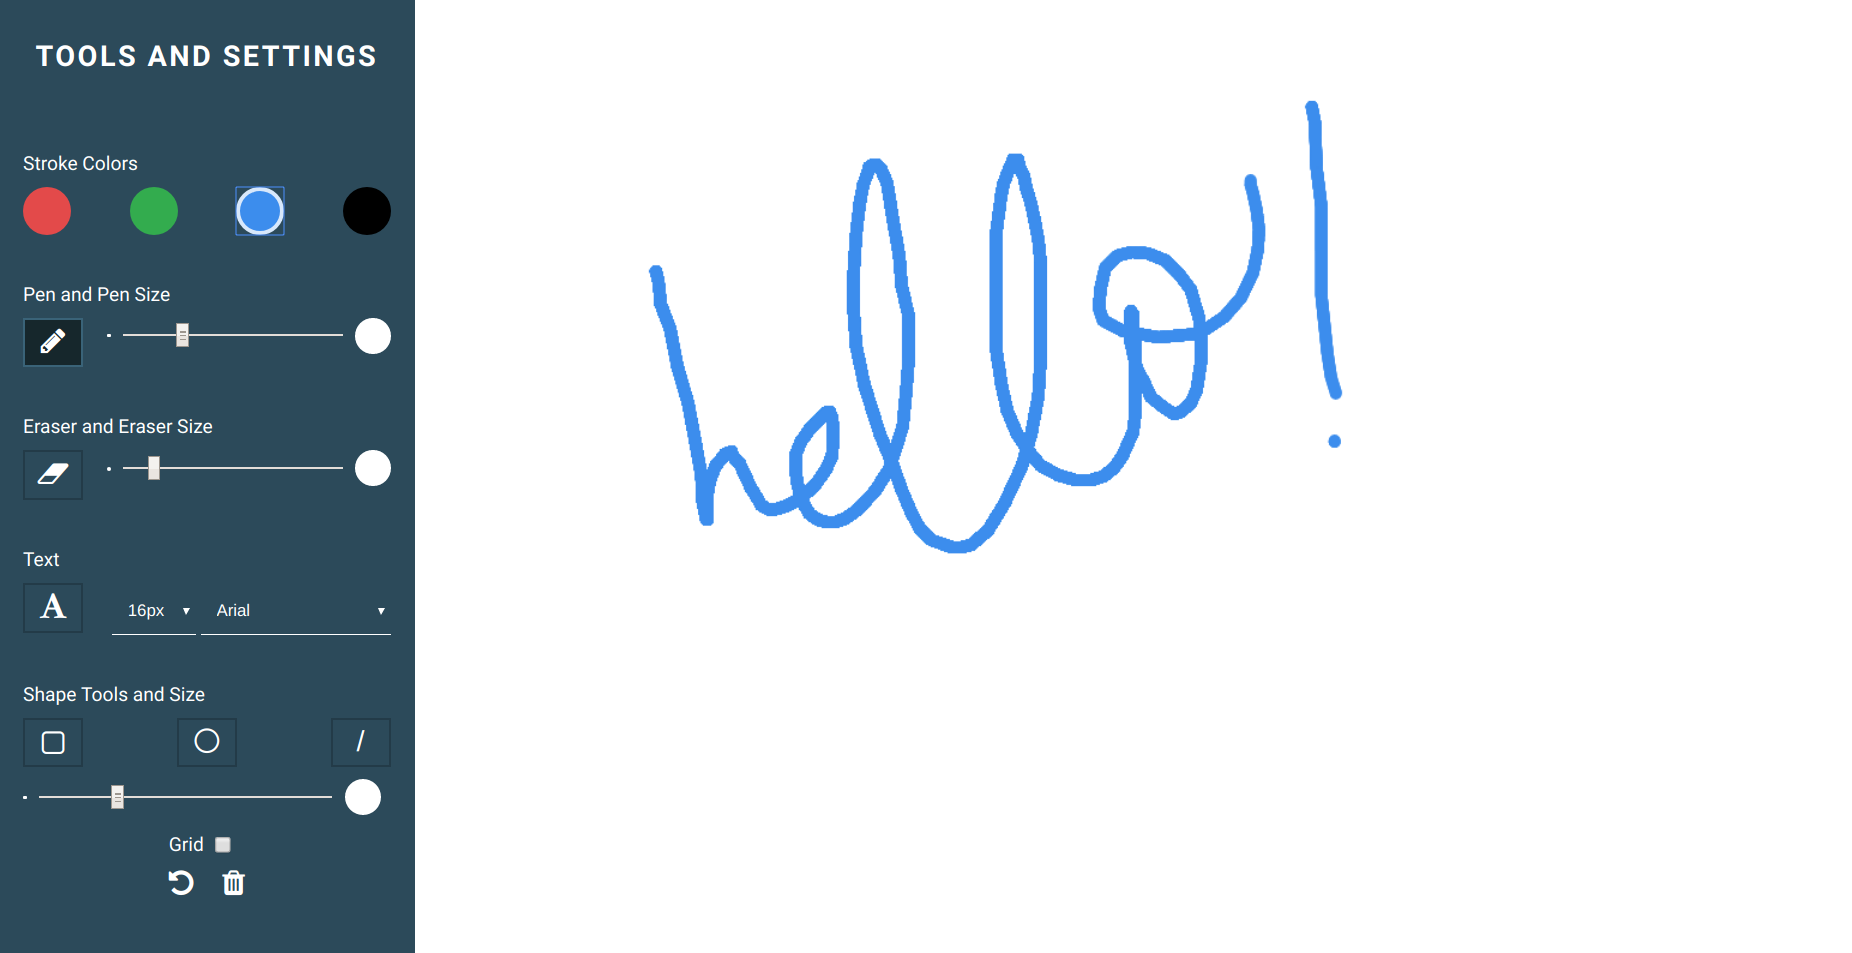 HTML5 sketchpad with 'hello' written on the canvas